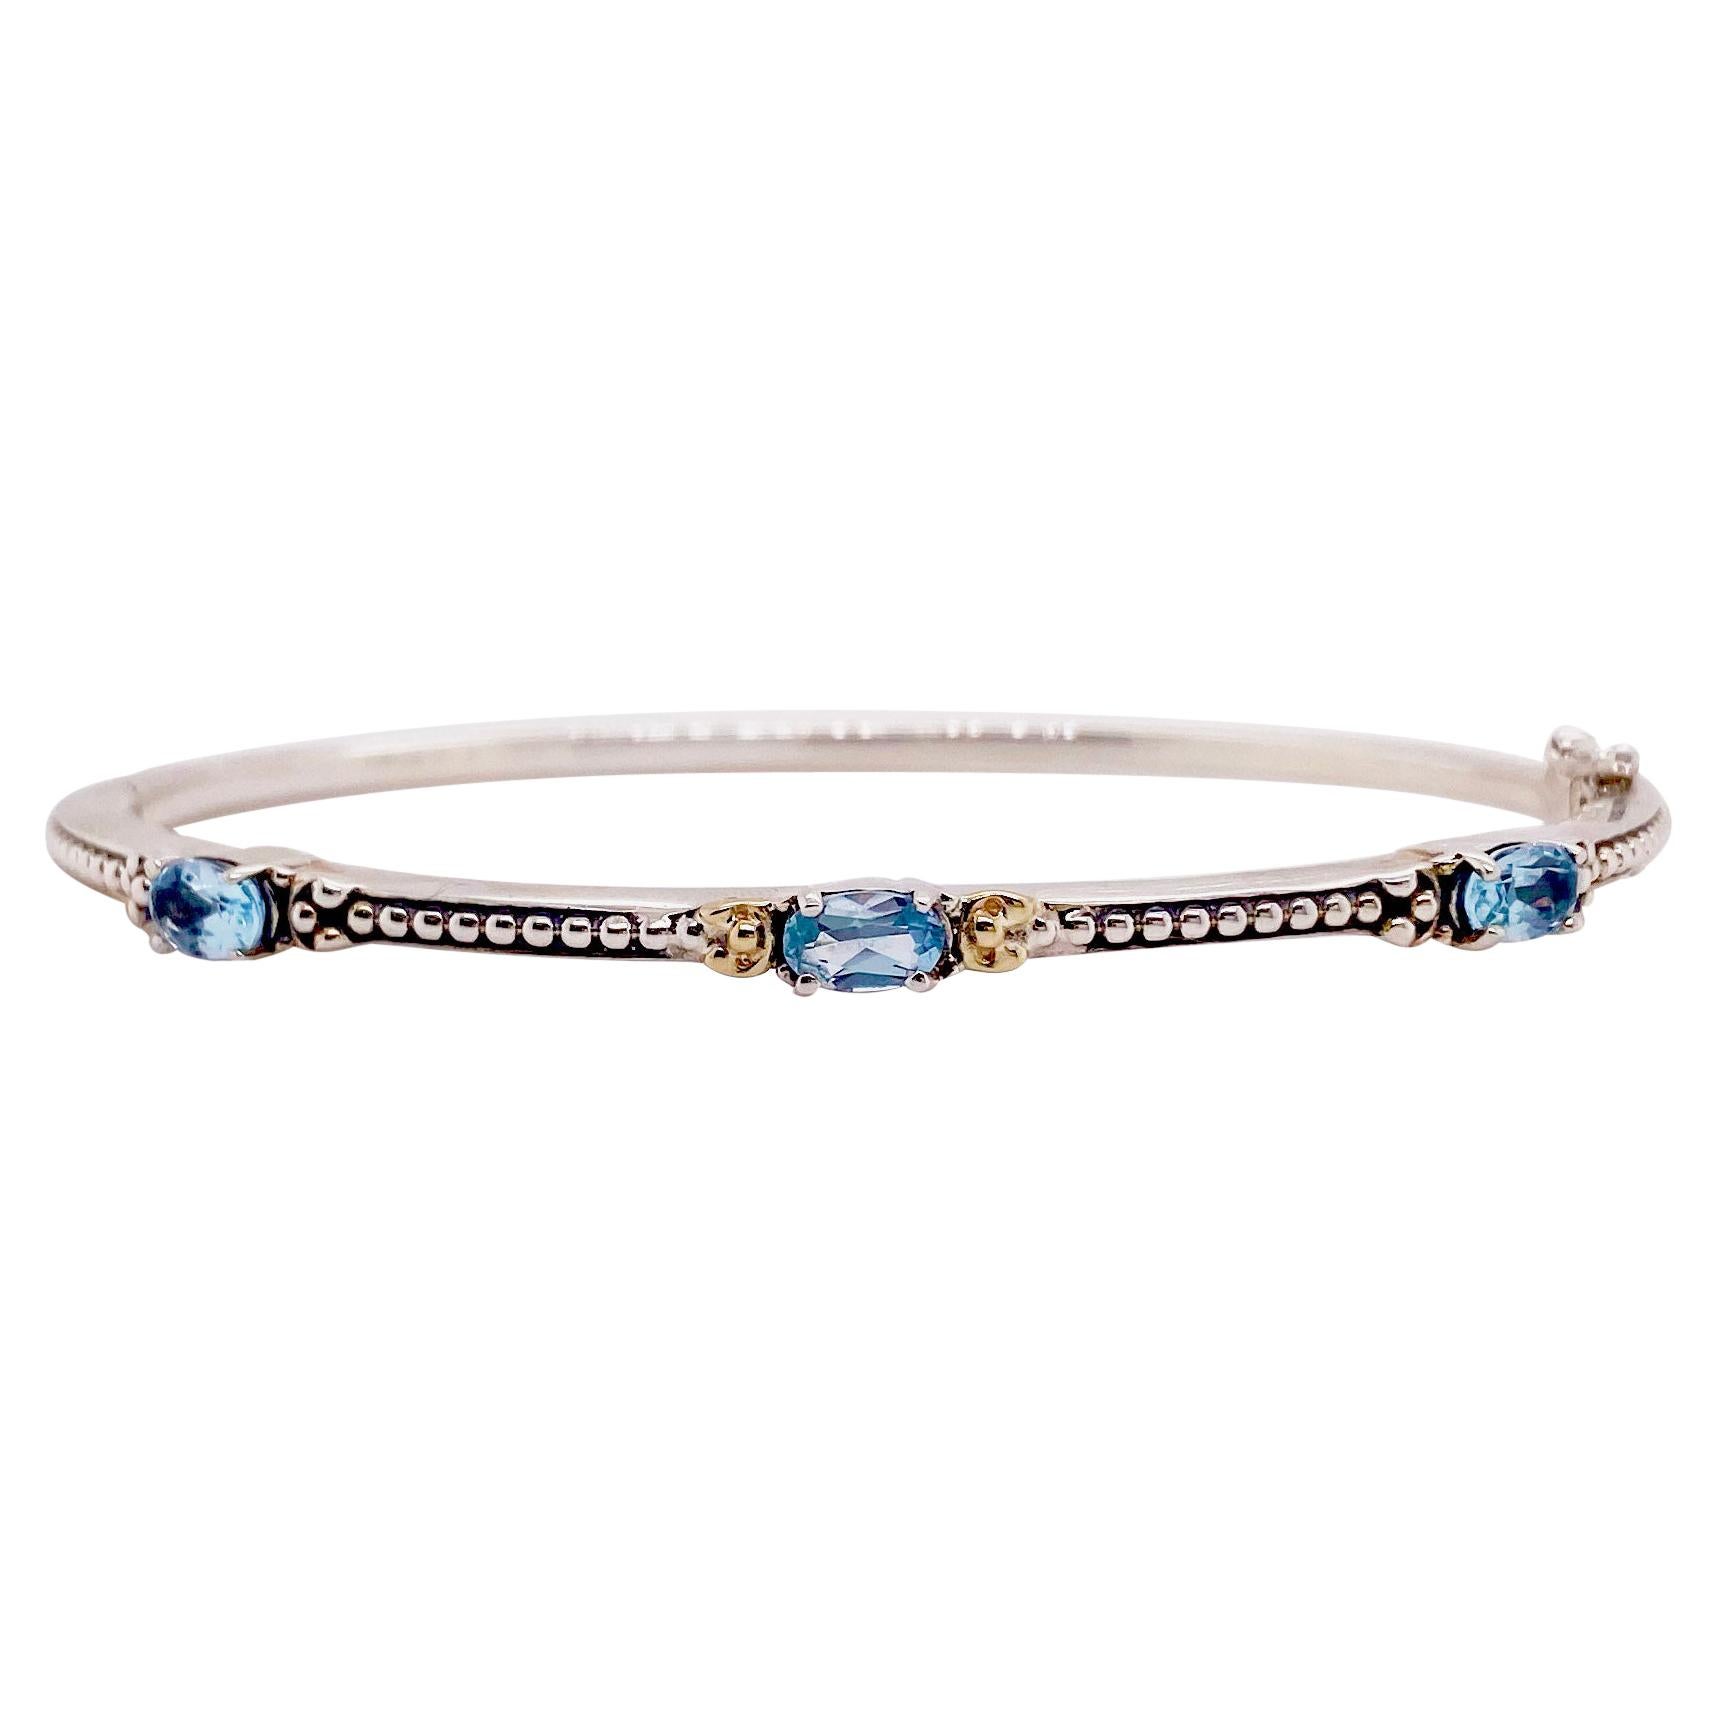 Blue Topaz Bracelet Mixed Metal Bangle and Bead Accents